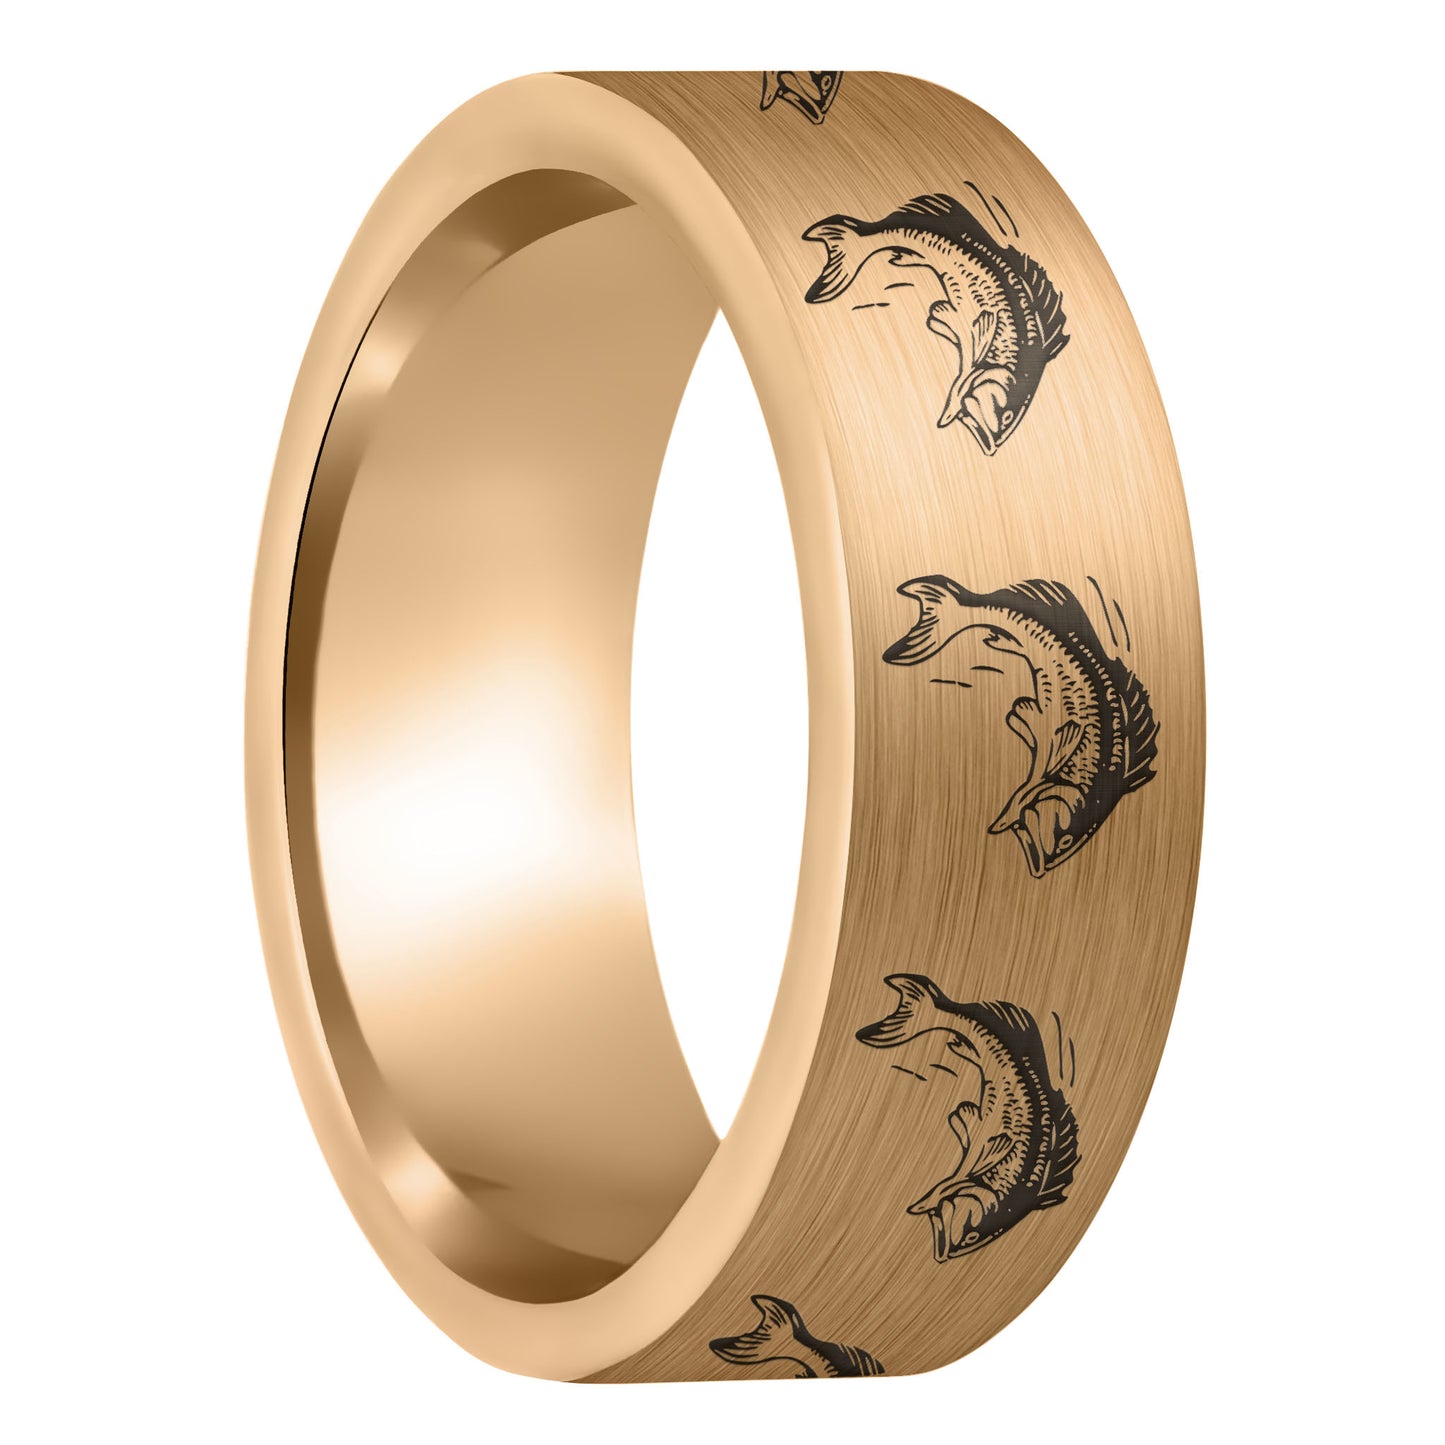 A bass fish brushed rose gold tungsten men's wedding band displayed on a plain white background.